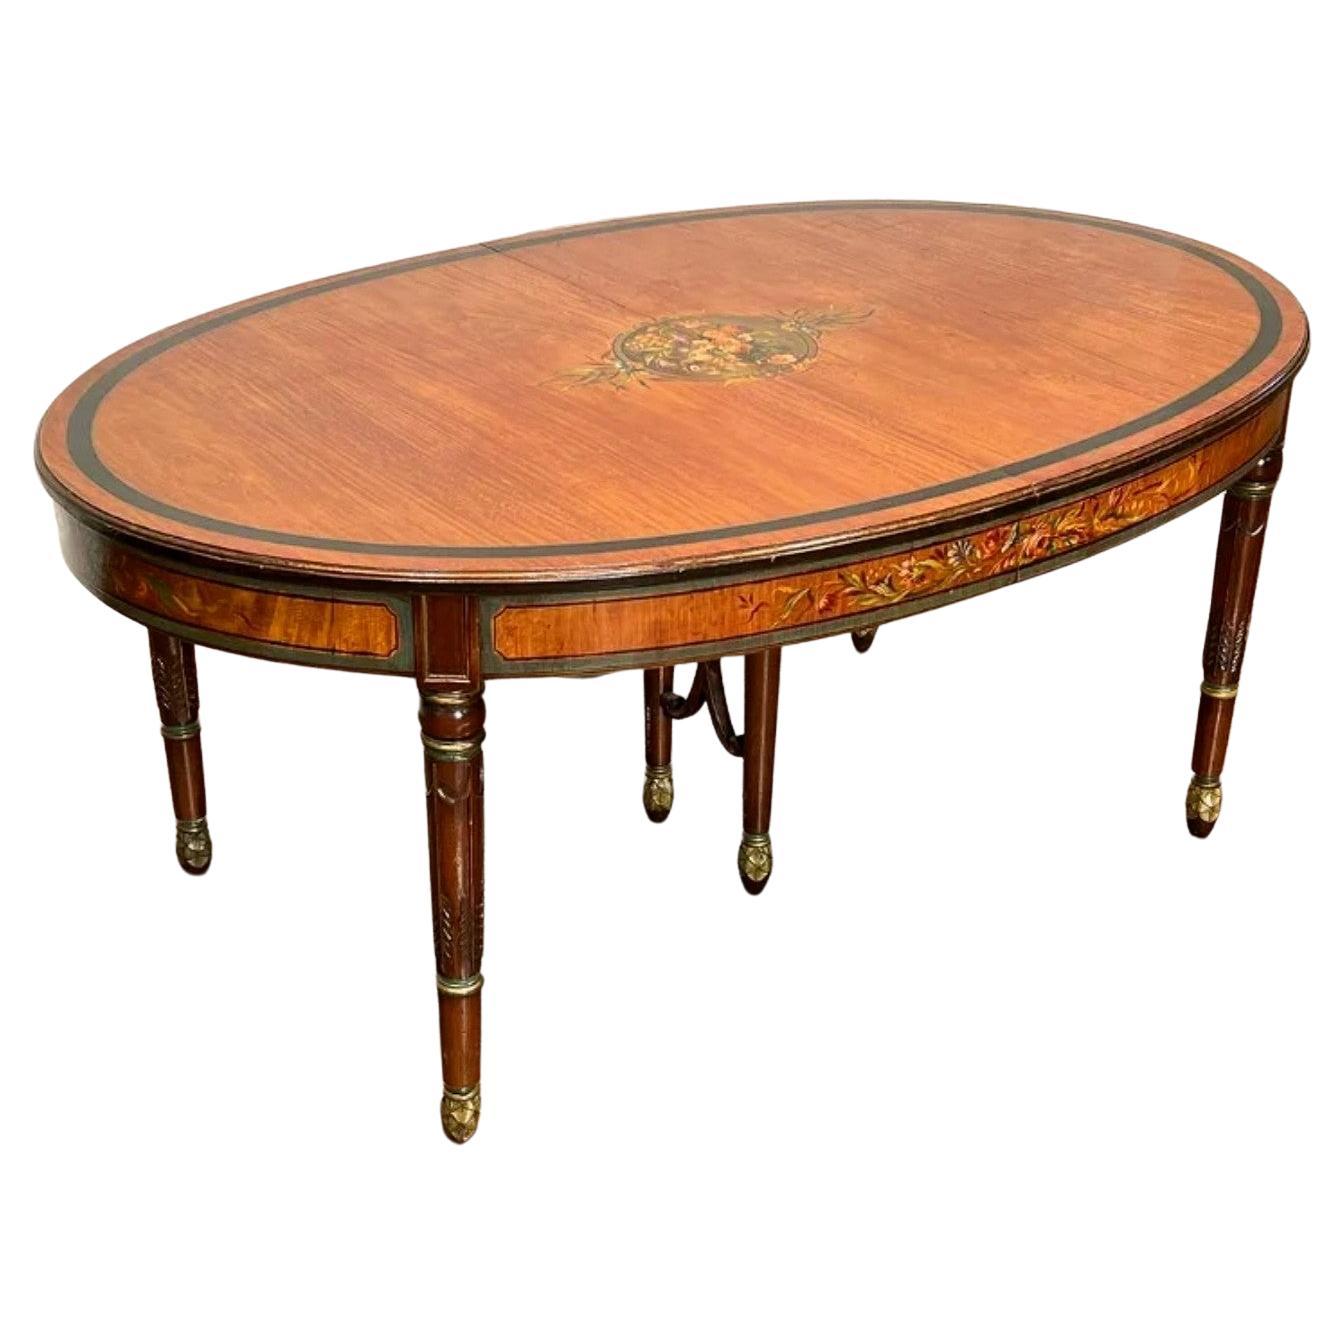 English Edwardian Period Adam Style Cocktail Table For Sale